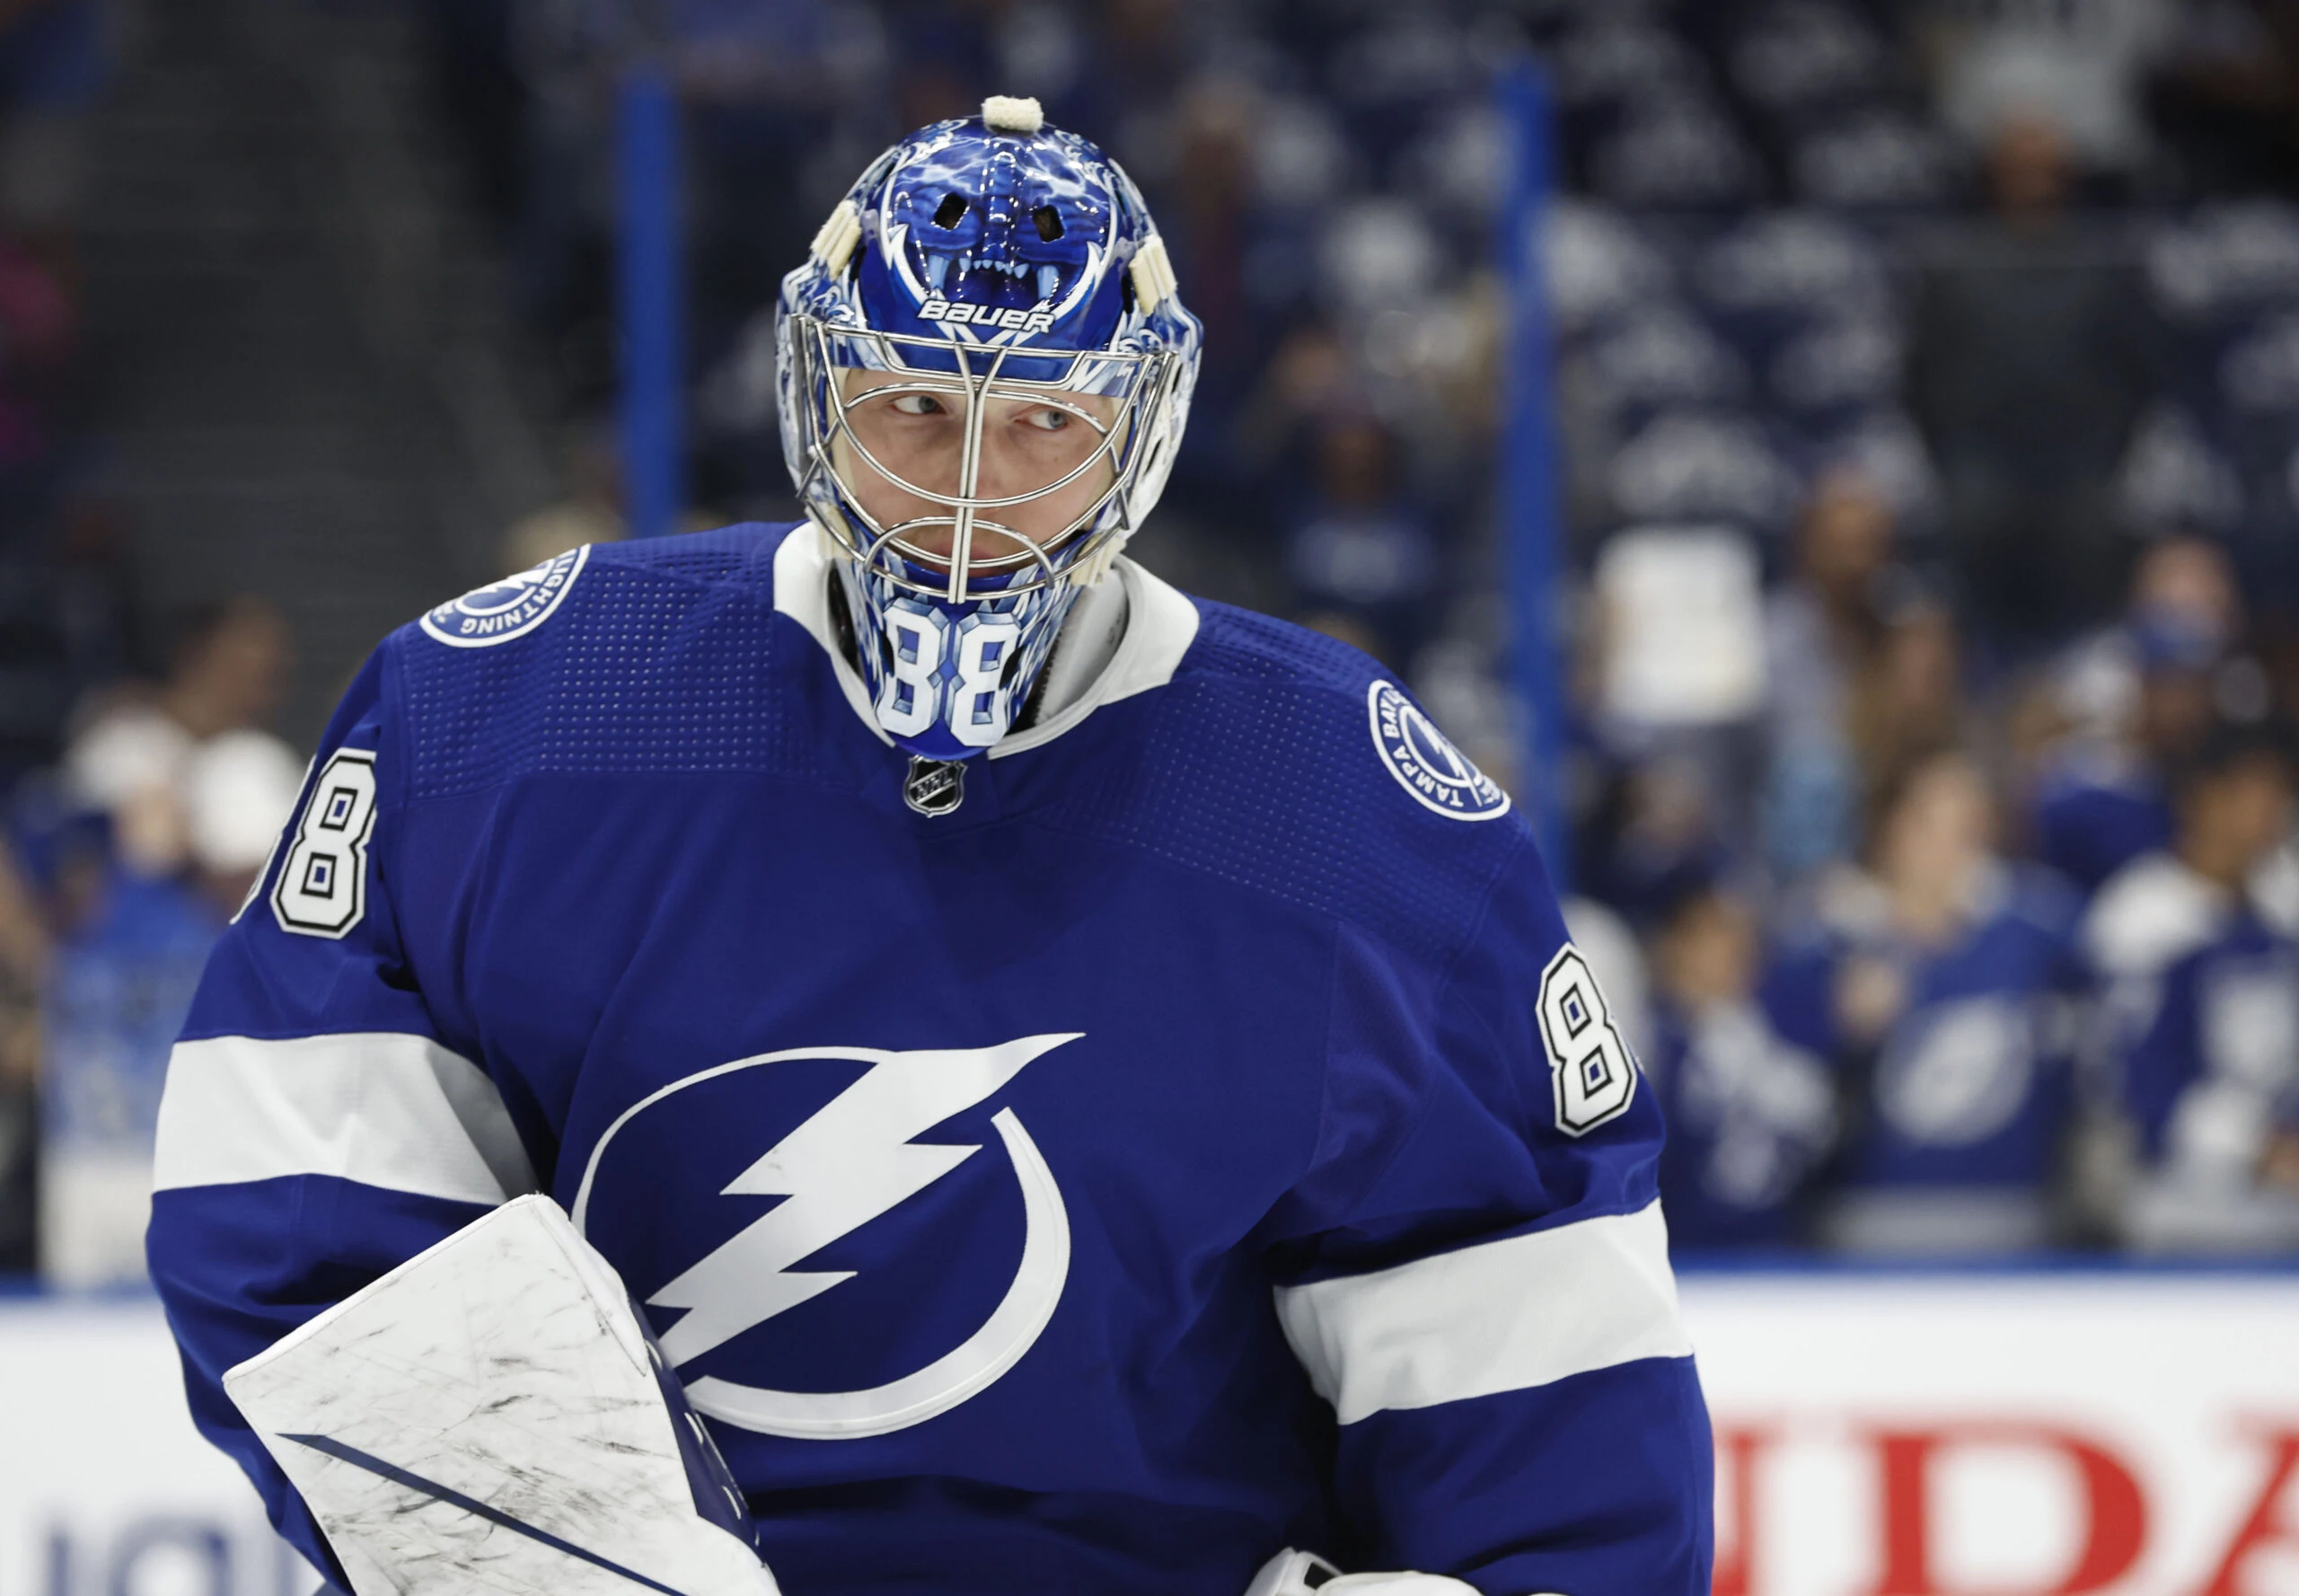 Tampa Bay Lightning goaltender Andrei Vasilevskiy (88) works out prior to the game against the Florida Panthers at Amalie Arena.